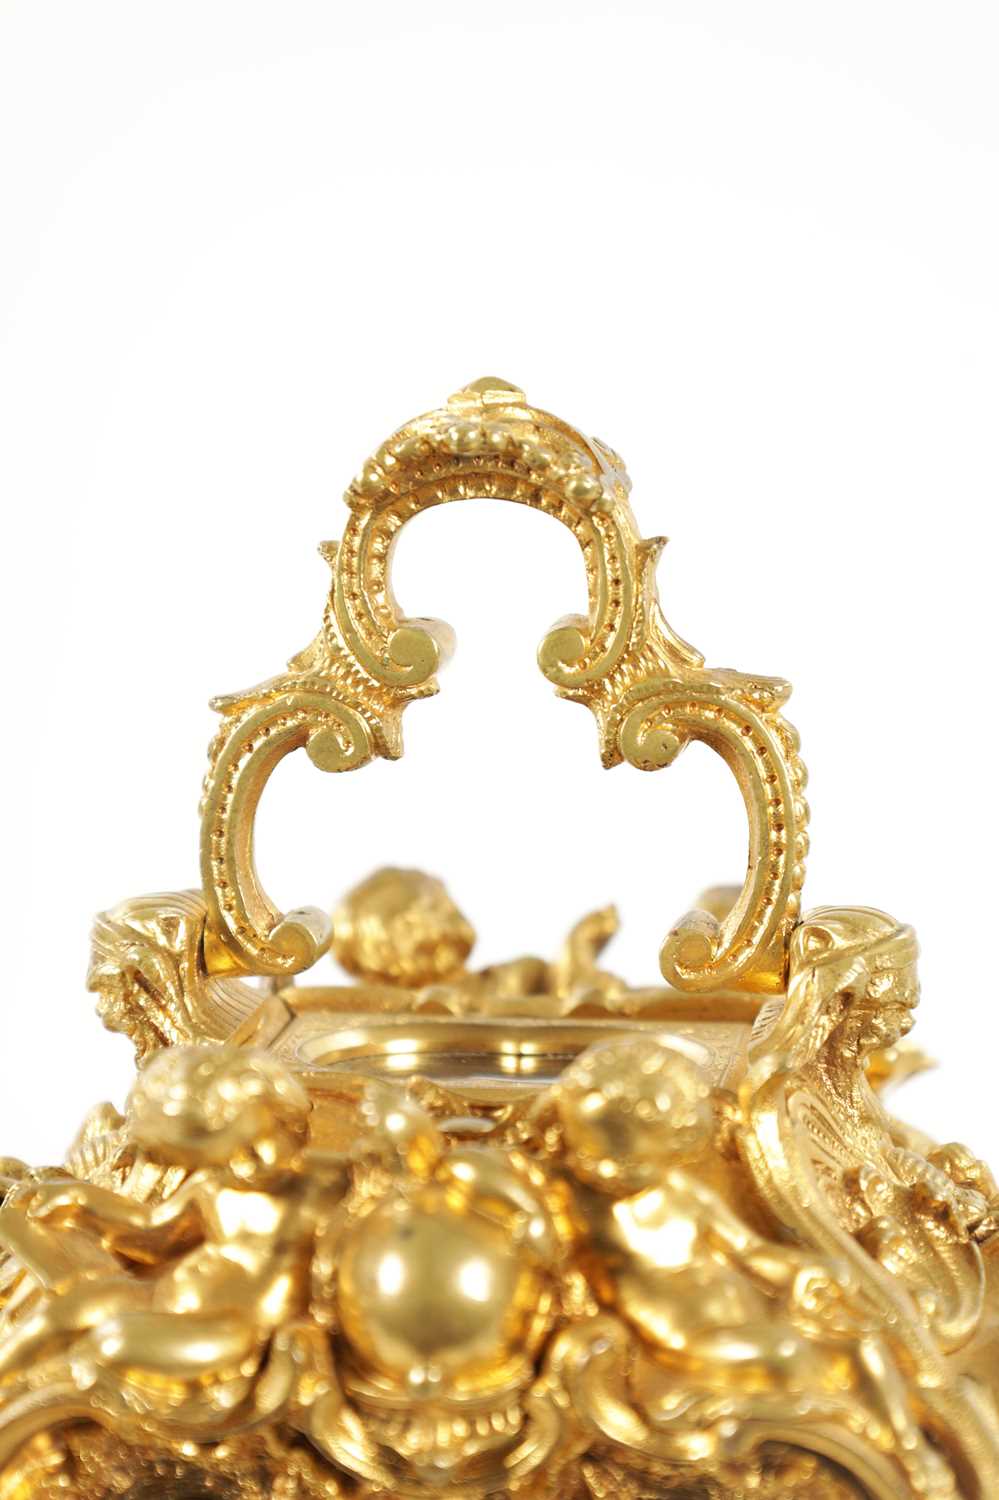 GROHE, PARIS. A FINE AND RARE MID 19TH CENTURY FRENCH CAST GILT BRASS ROCOCO REPEATING PETITE SONNER - Image 3 of 17